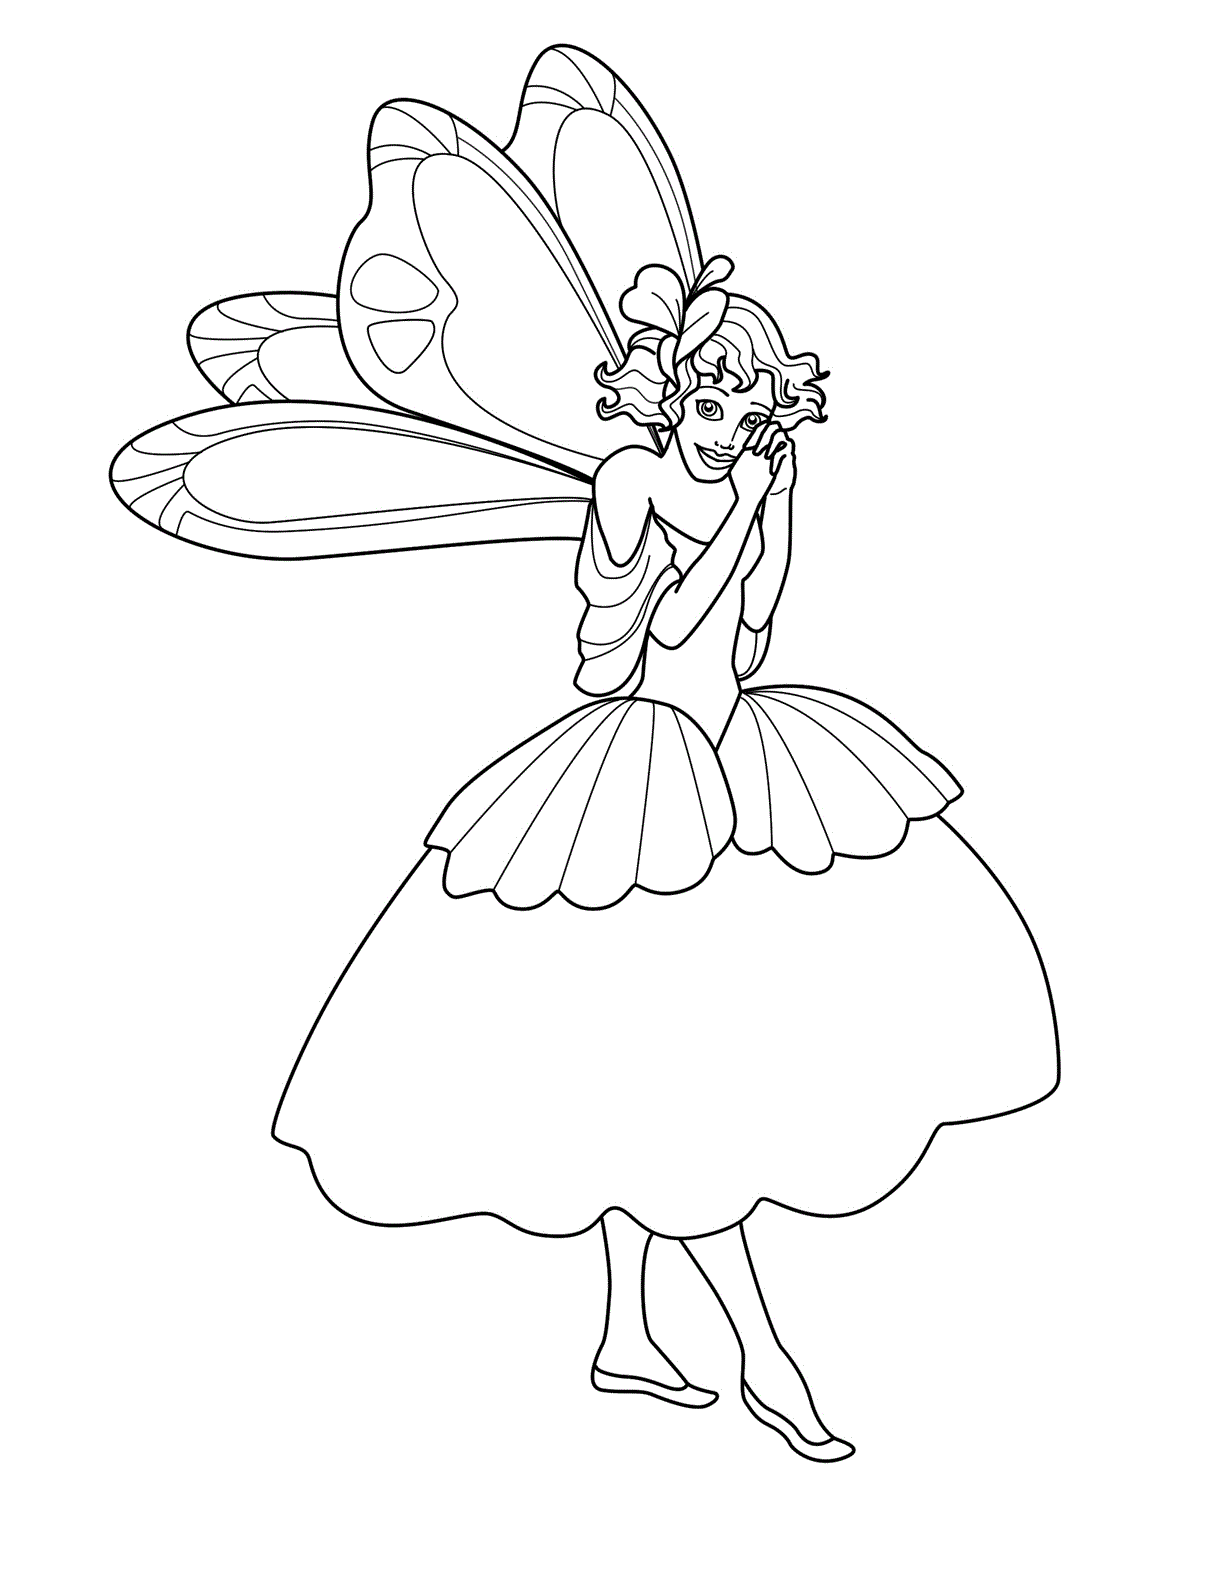 Free Coloring Pages For Kids Fairies Coloring Pages